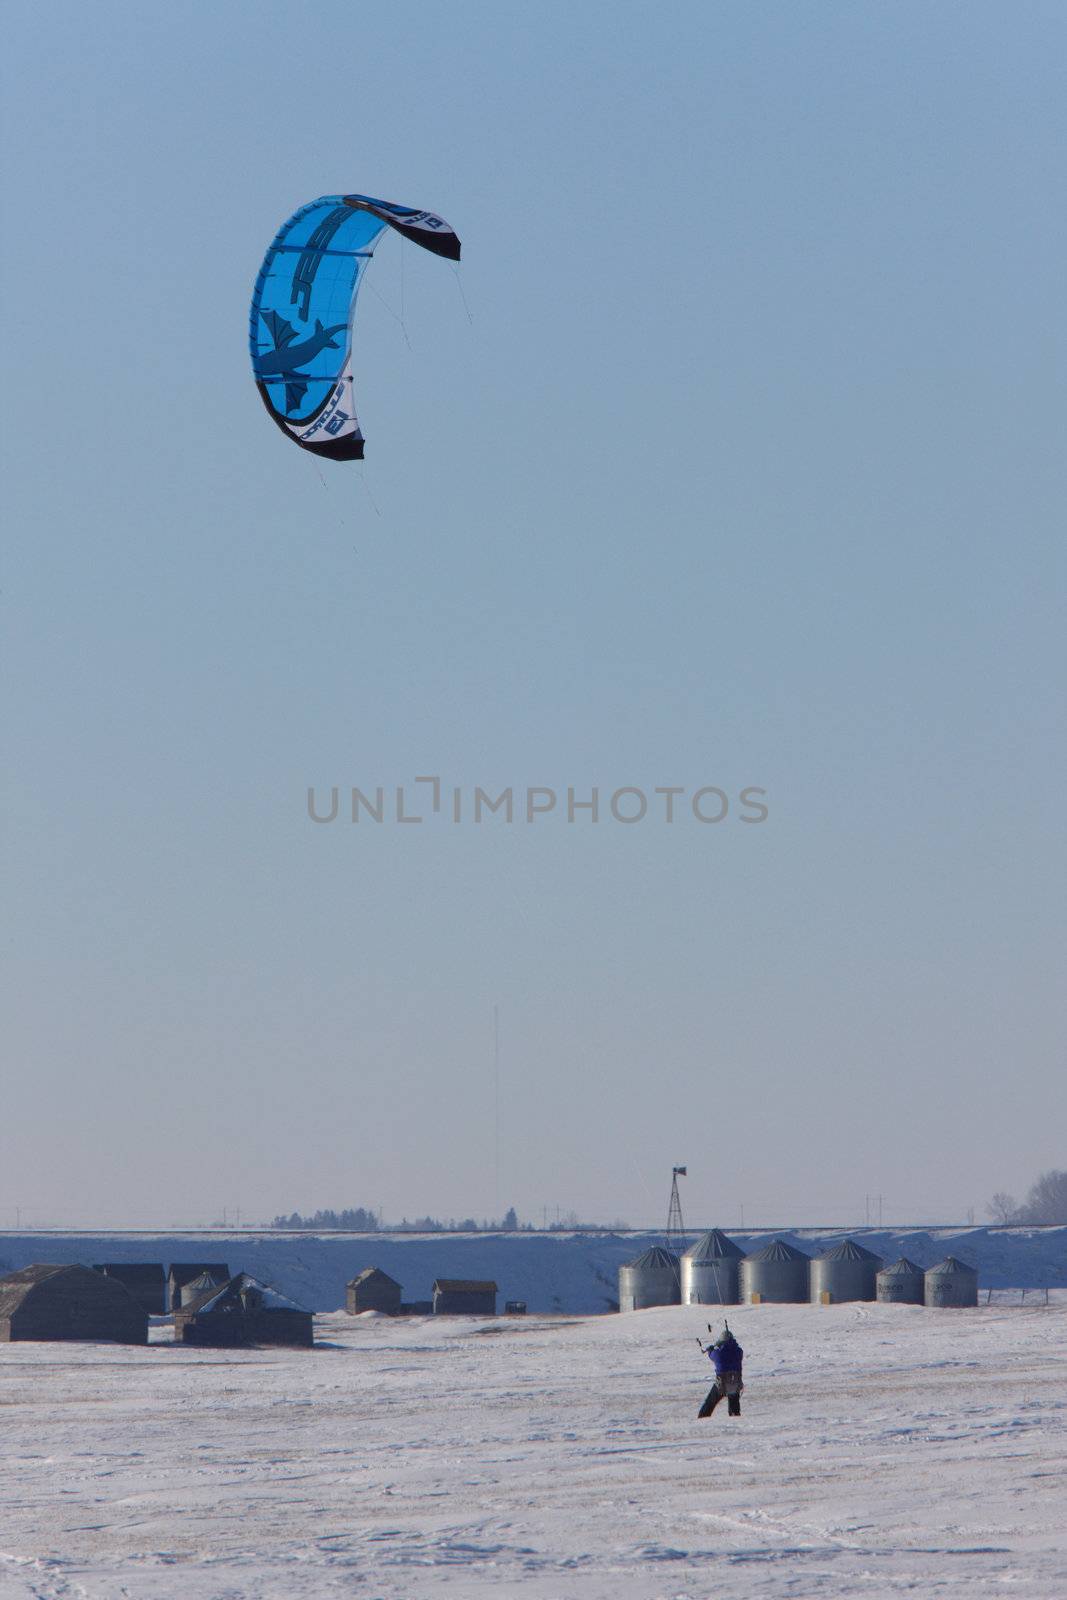 parasail snowboarding by pictureguy